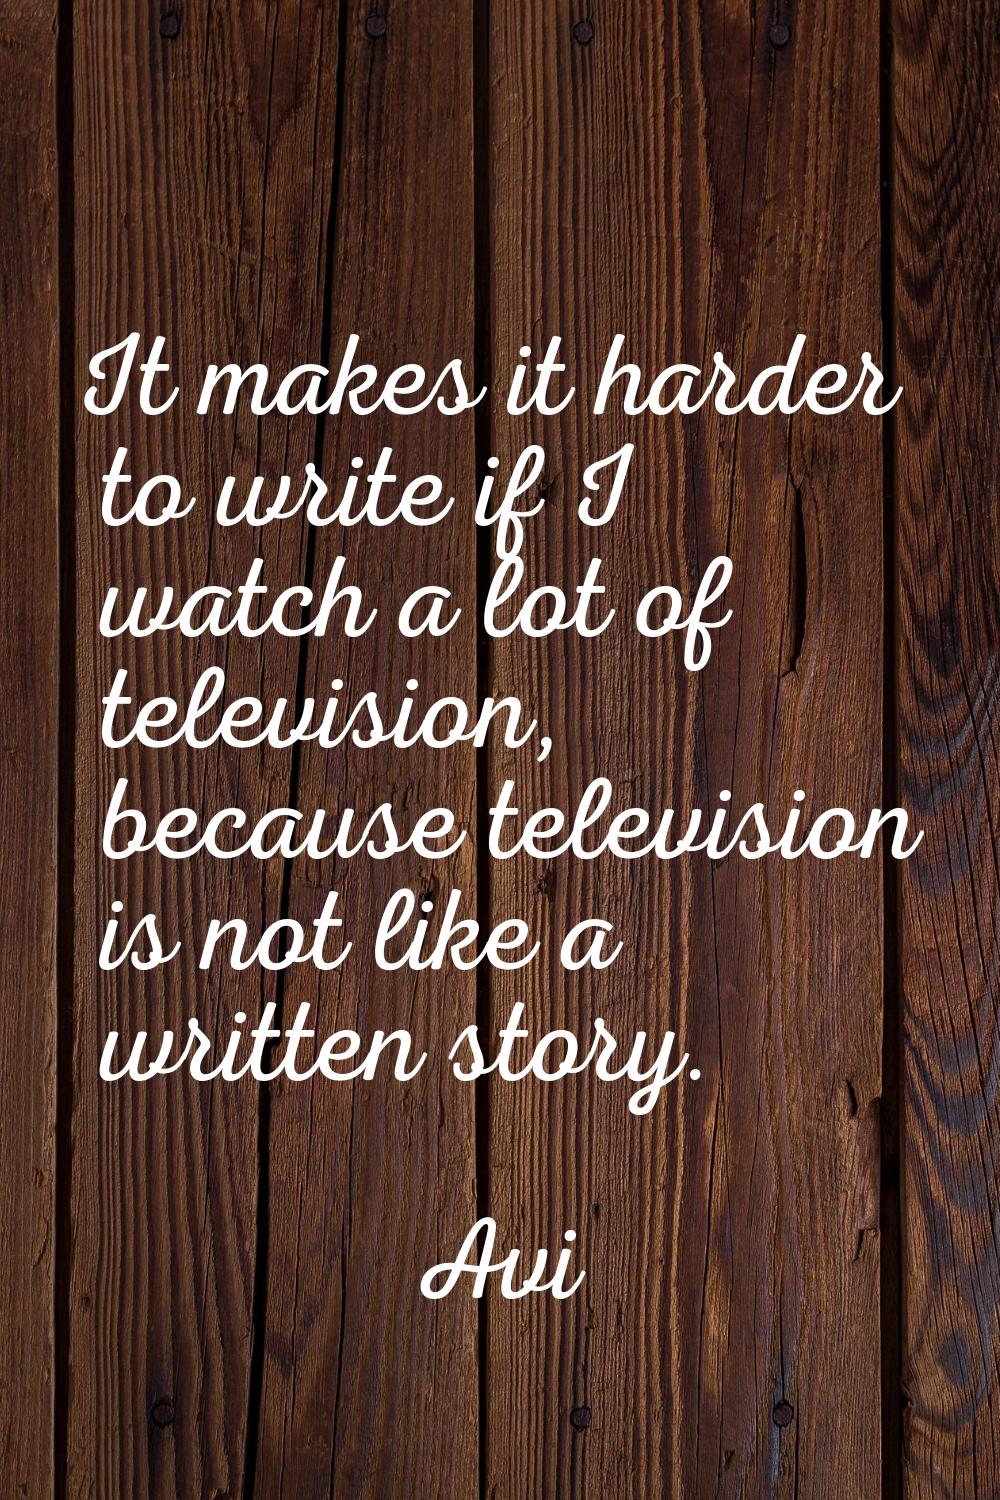 It makes it harder to write if I watch a lot of television, because television is not like a writte